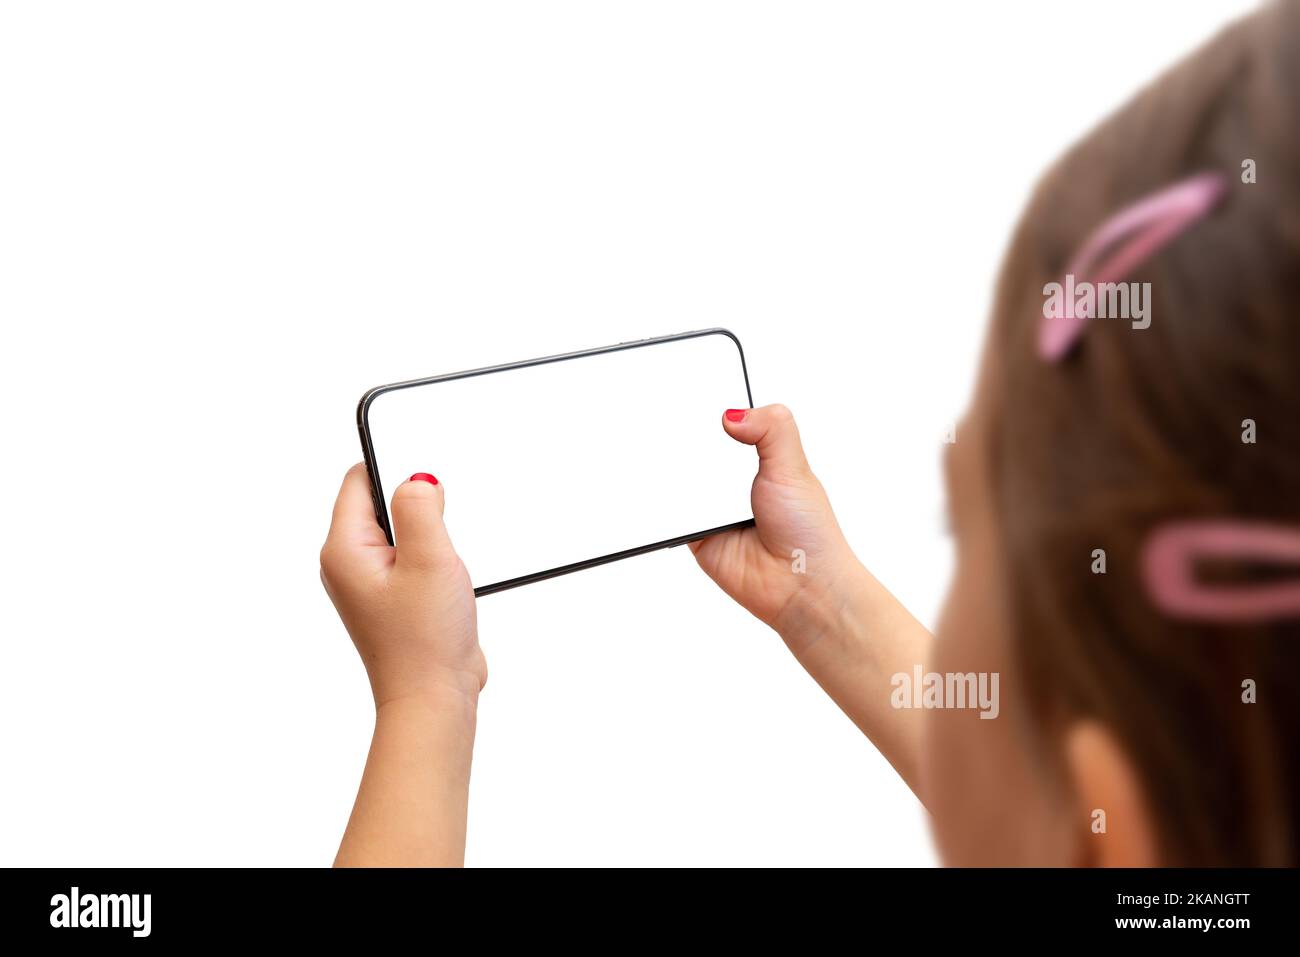 Little girl holding smart phone in horizontal position. Isoalted display and background. Playing game or watch video concept Stock Photo